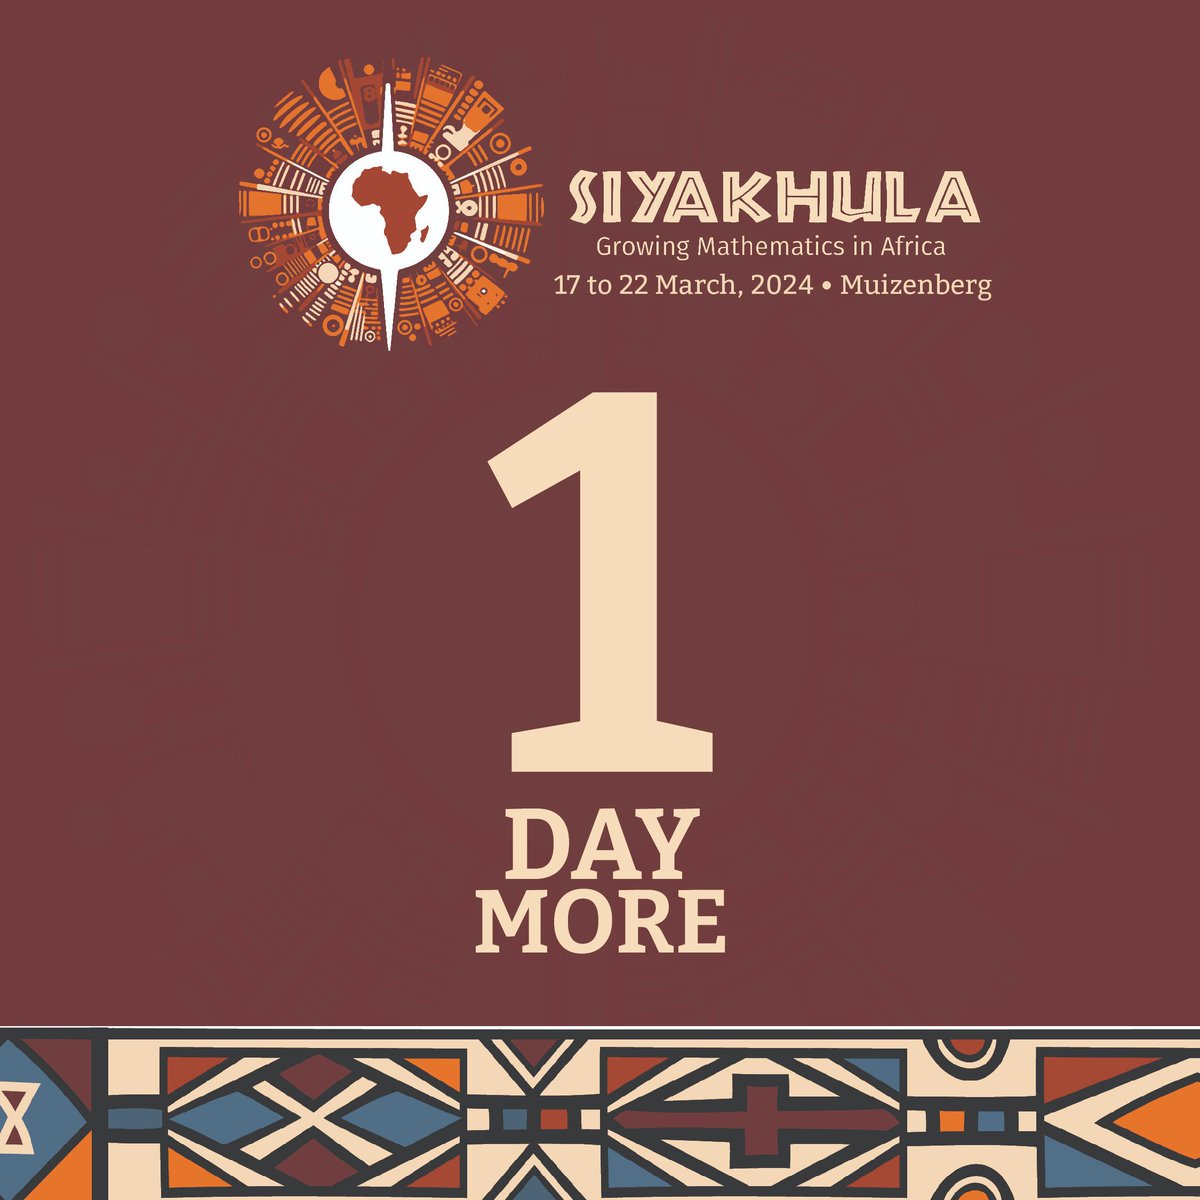 Tomorrow is the day! The week-long #SiyakhulaFestival celebrating Africa's #mathematical heritage begins in just one day! Be part of this extraordinary journey as we promote growth in #scientific endeavors and strengthen our roots. #AIMS20th #Countdown #JoinTheCelebration